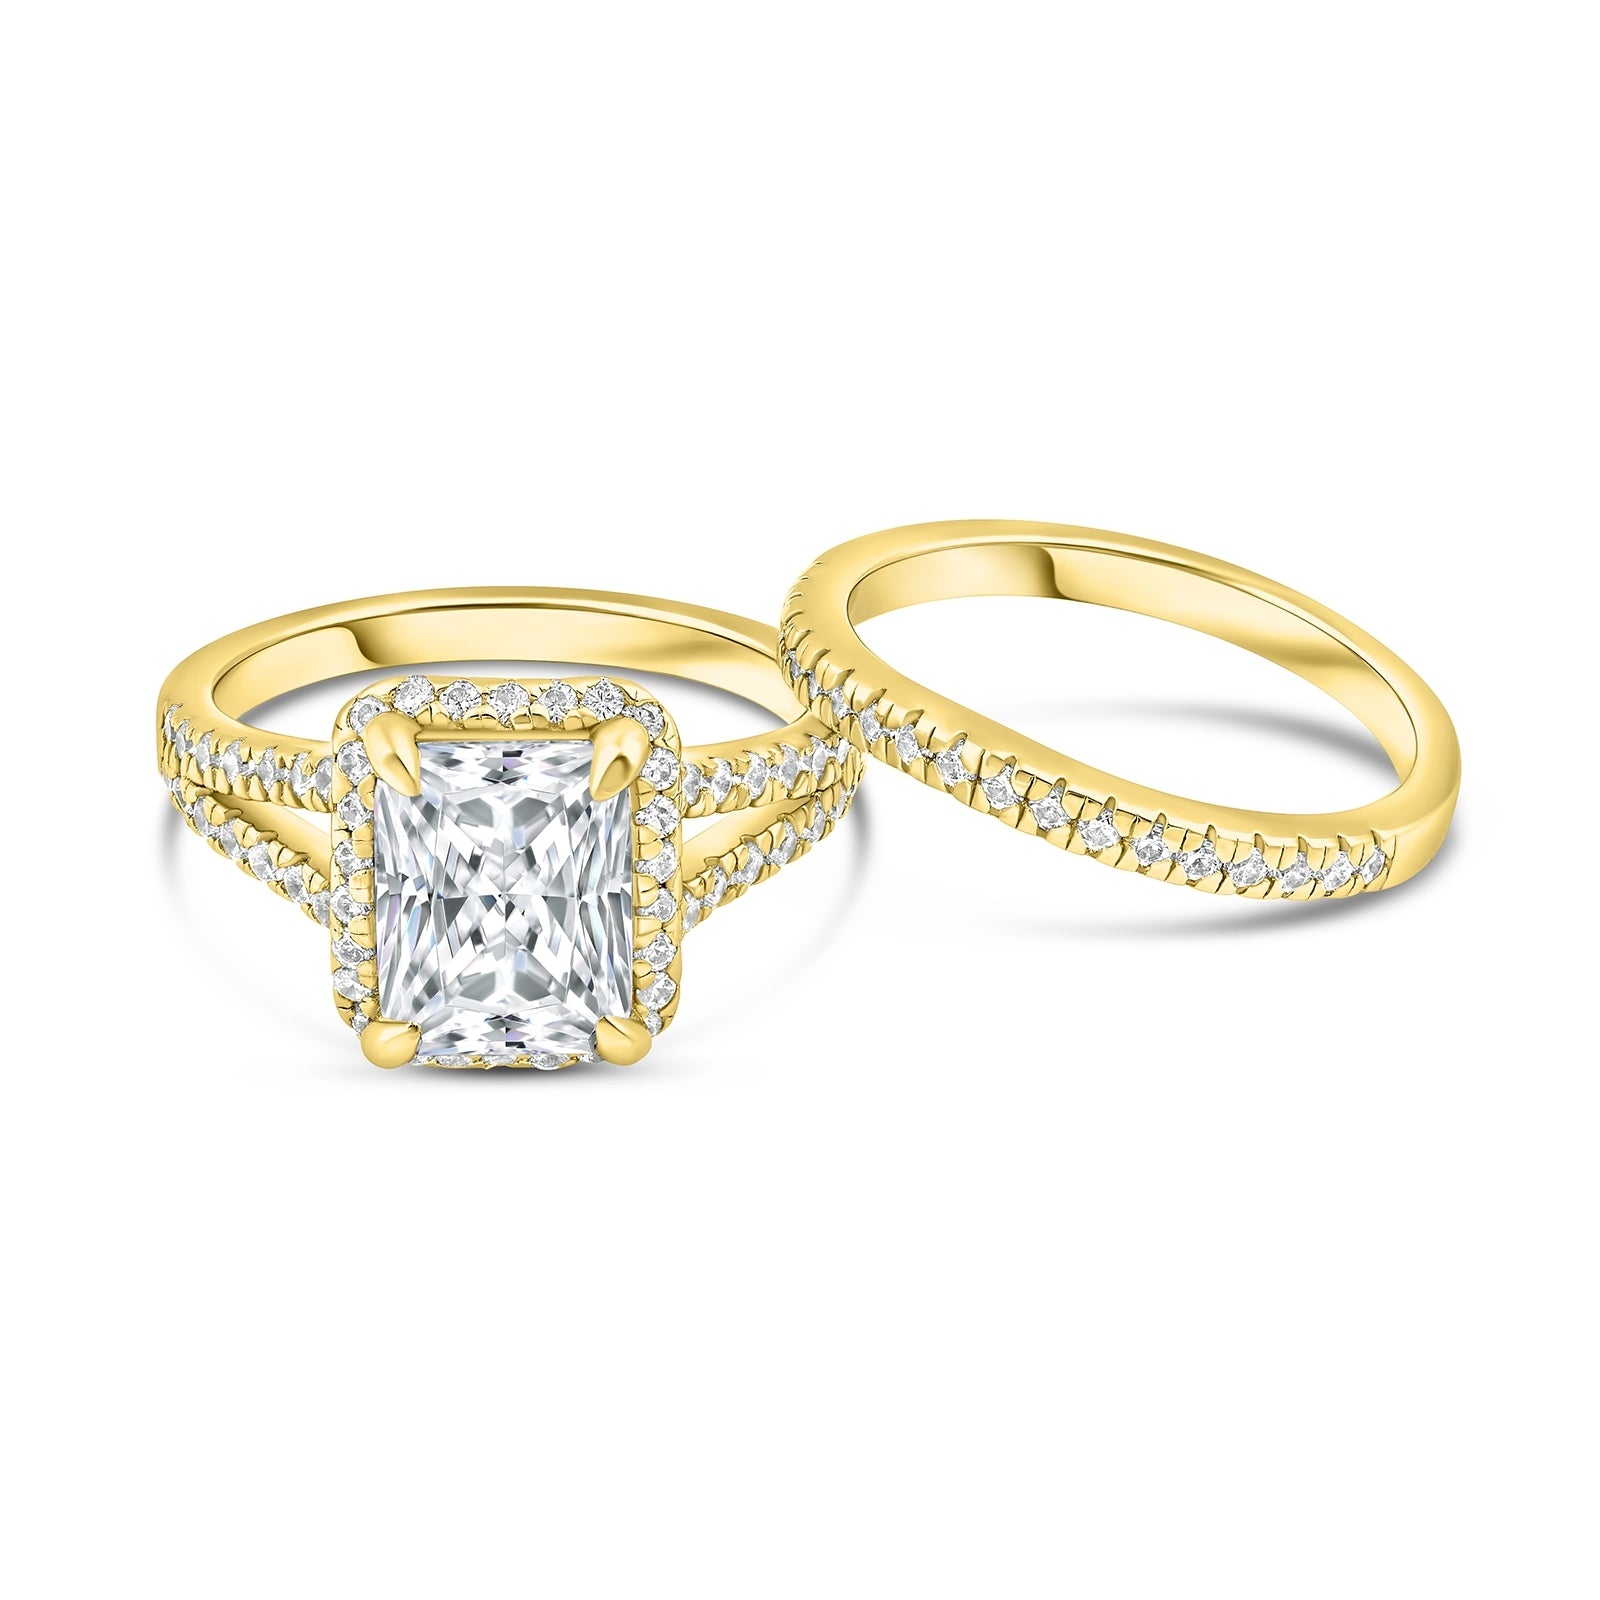 gold wedding ring set with halo and half eternity band detailing